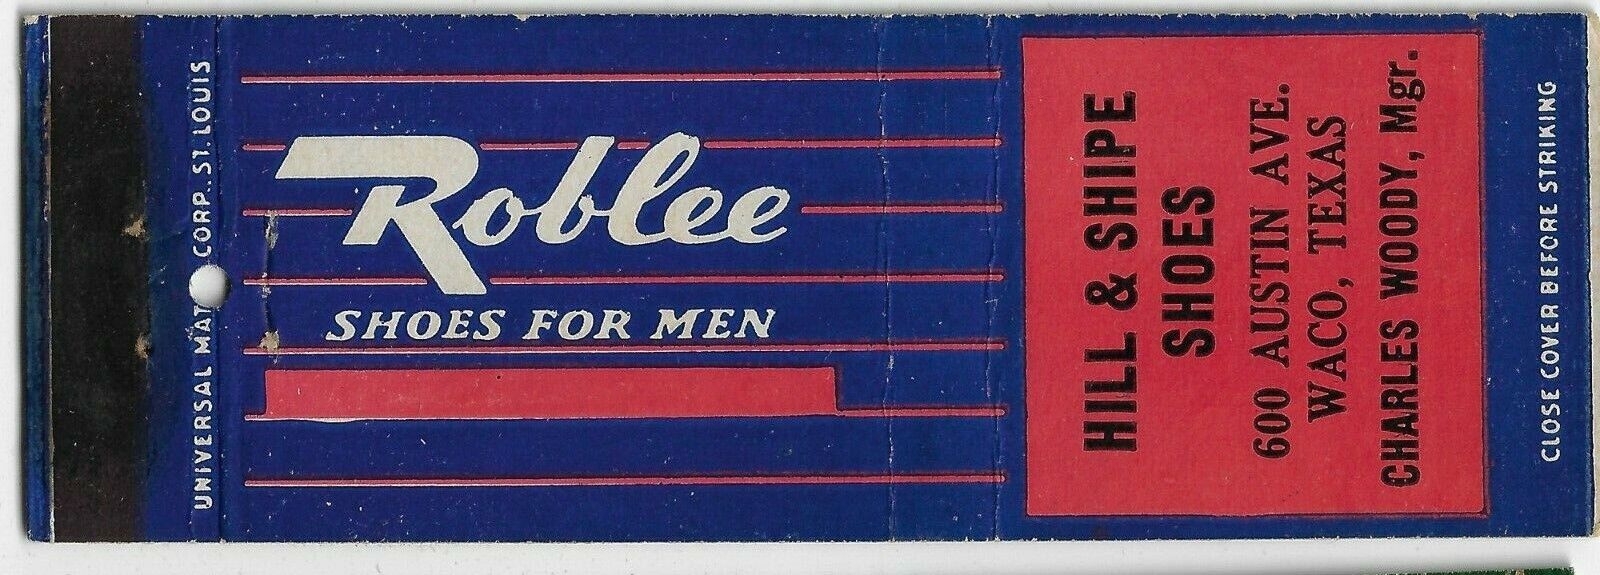 Roblee Shoes Hill & Shipe Shoes Waco Texas Empty Matchcover